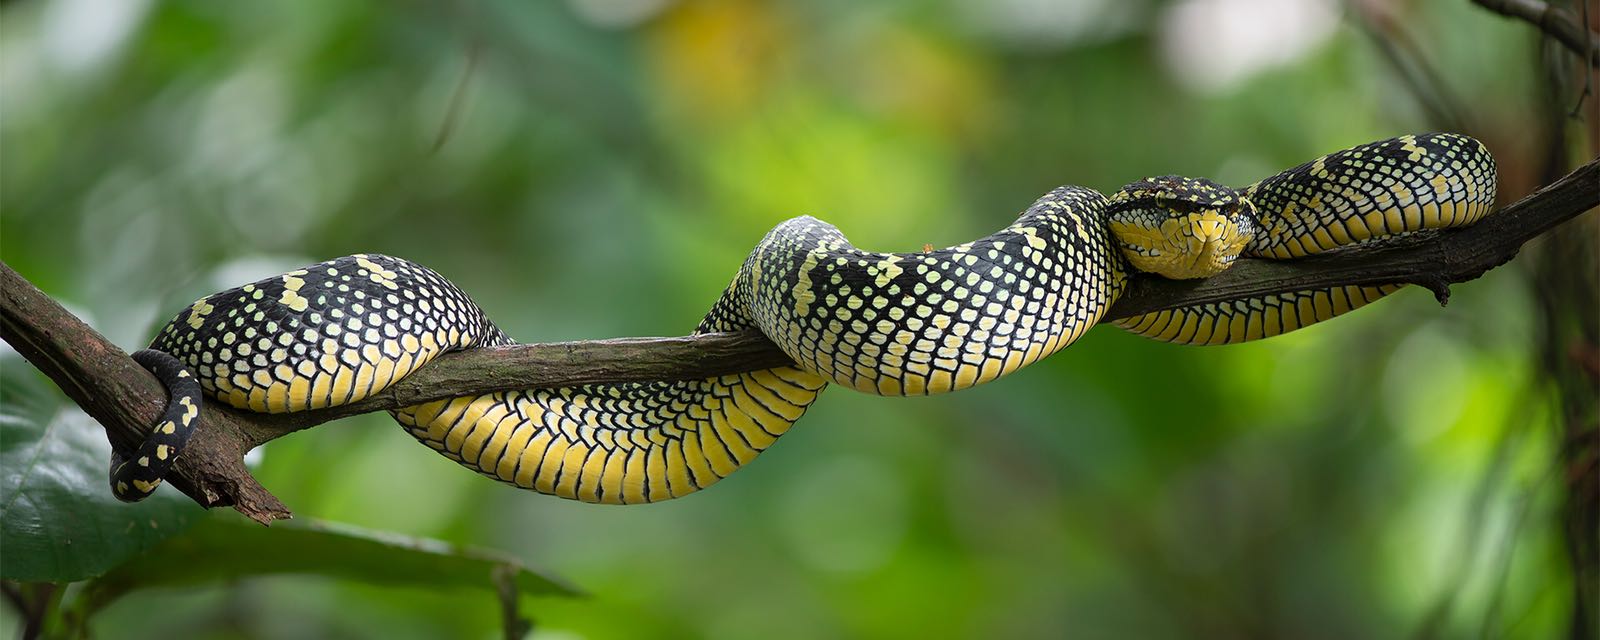 Singapore Wild Animals: Pit Vipers